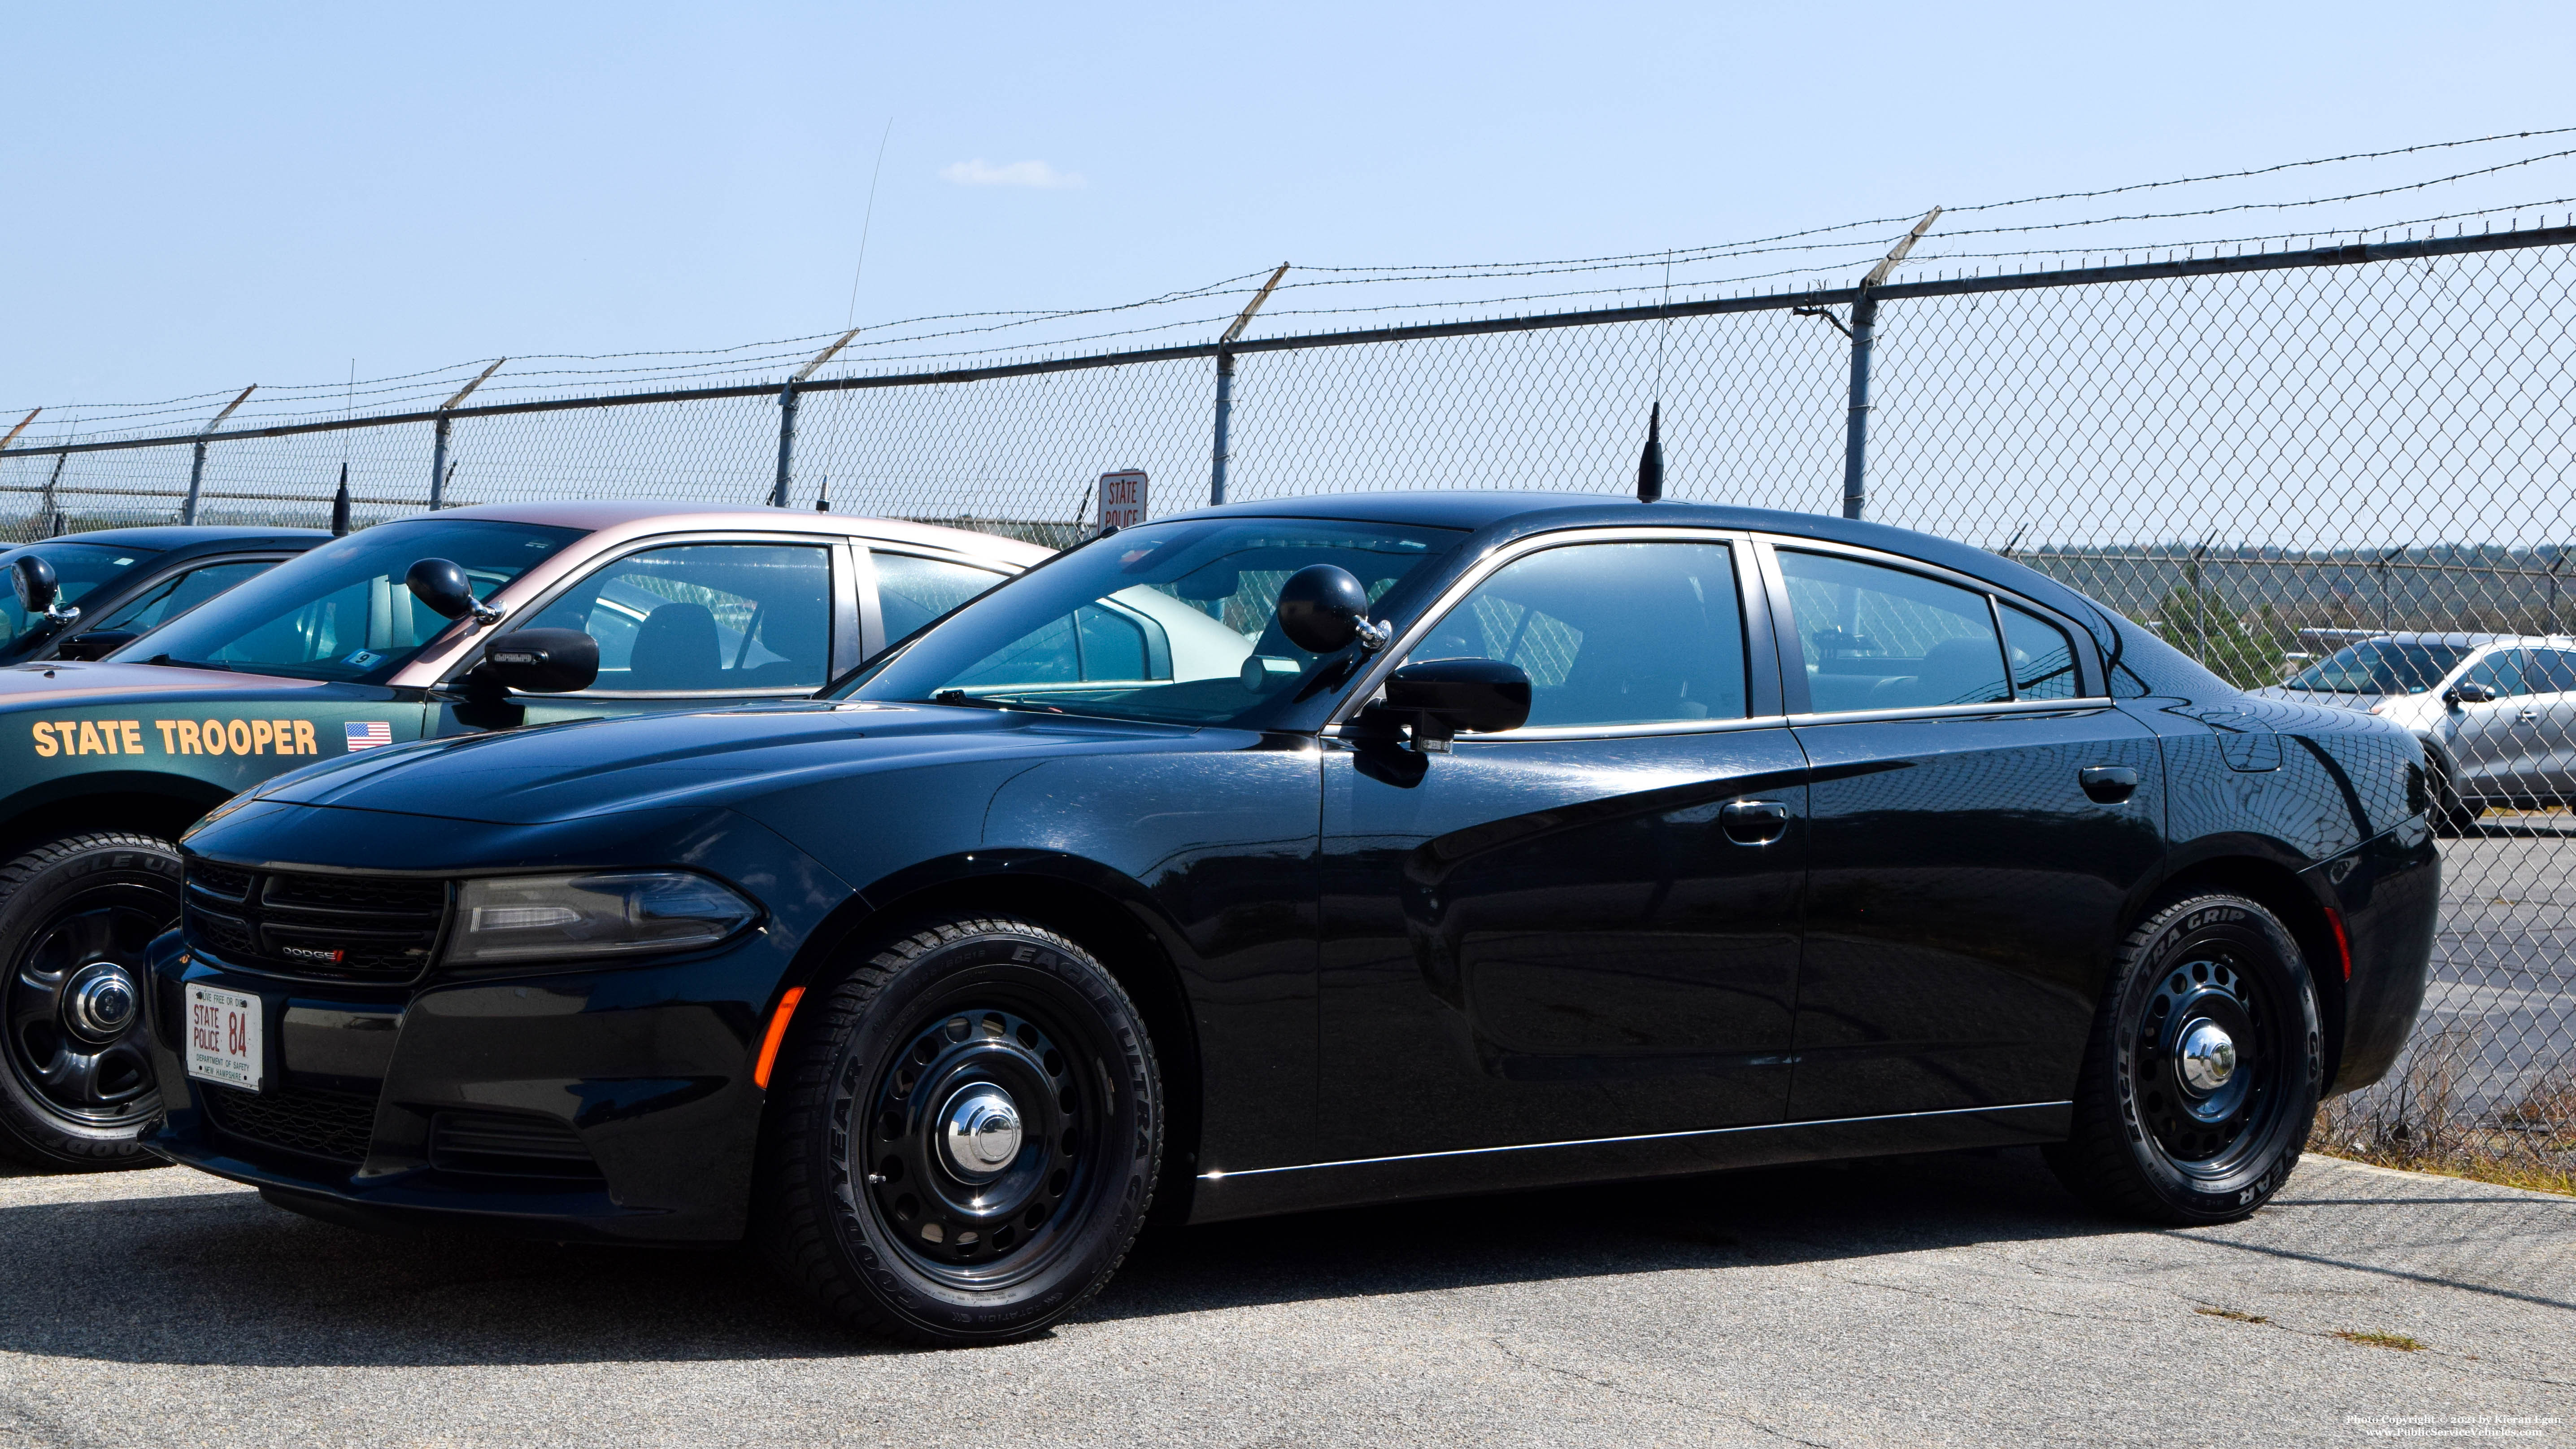 A photo  of New Hampshire State Police
            Cruiser 84, a 2017-2019 Dodge Charger             taken by Kieran Egan